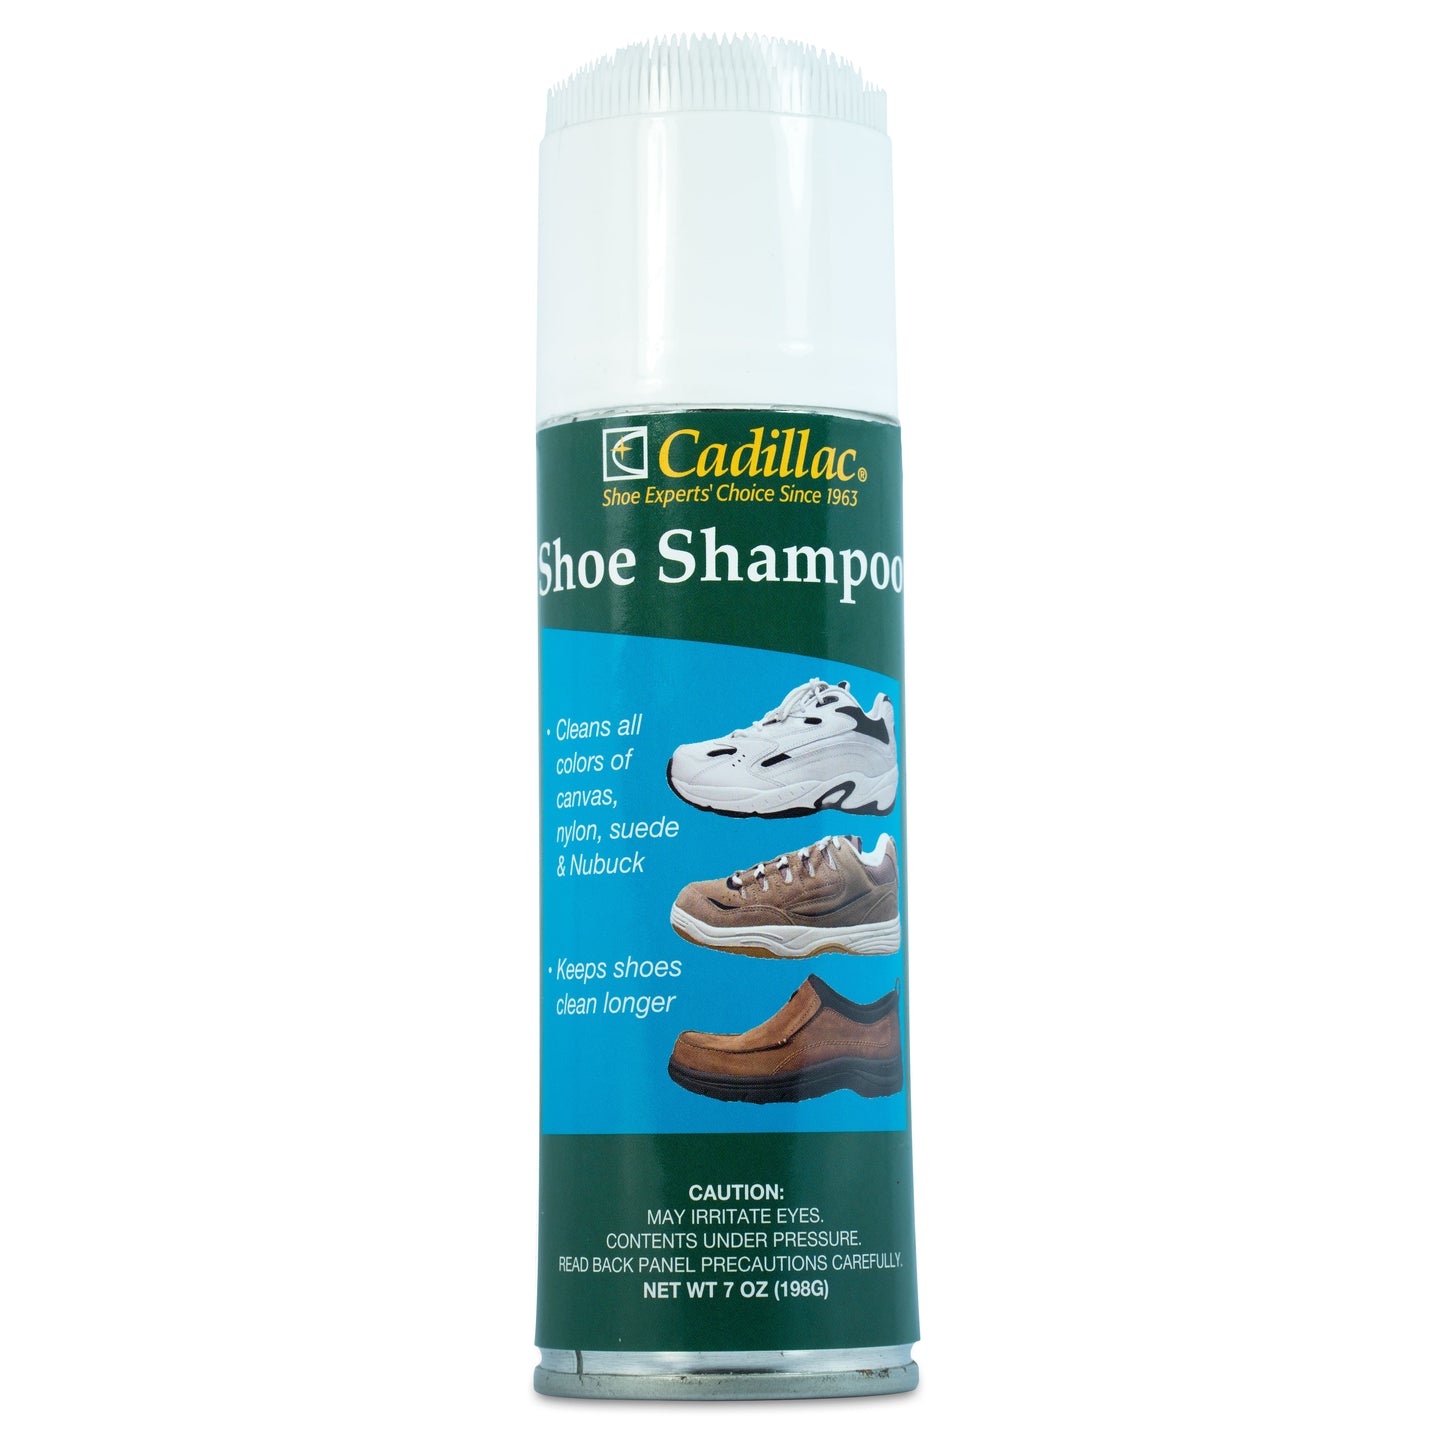 Shoe Cleaning Shampoo - 5 Important things to remember